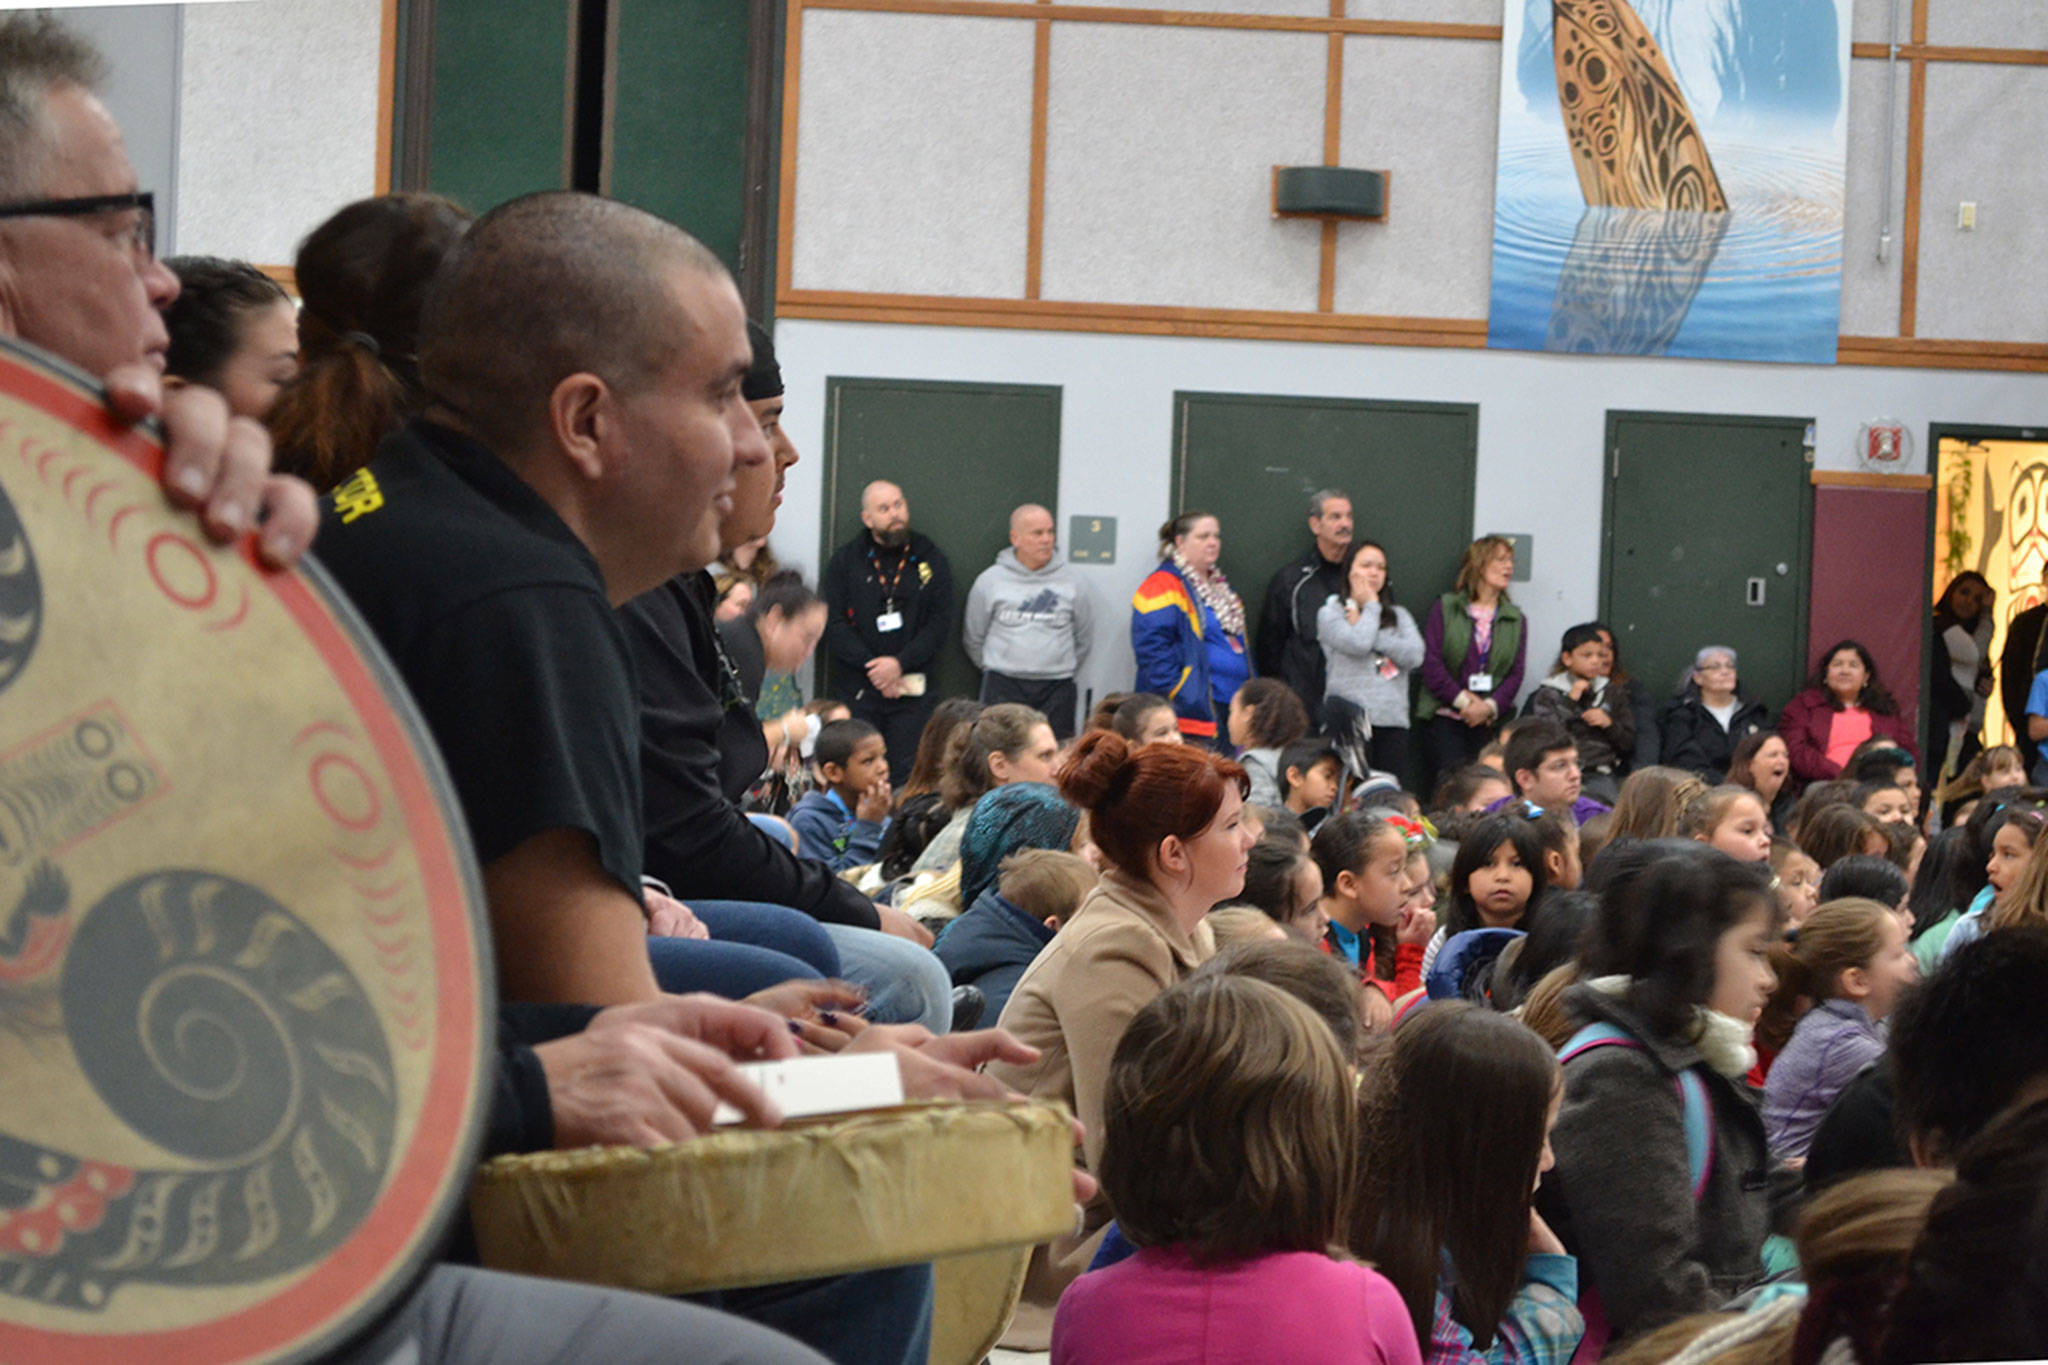 Schools at Tulalip learn about legendary fishing hero